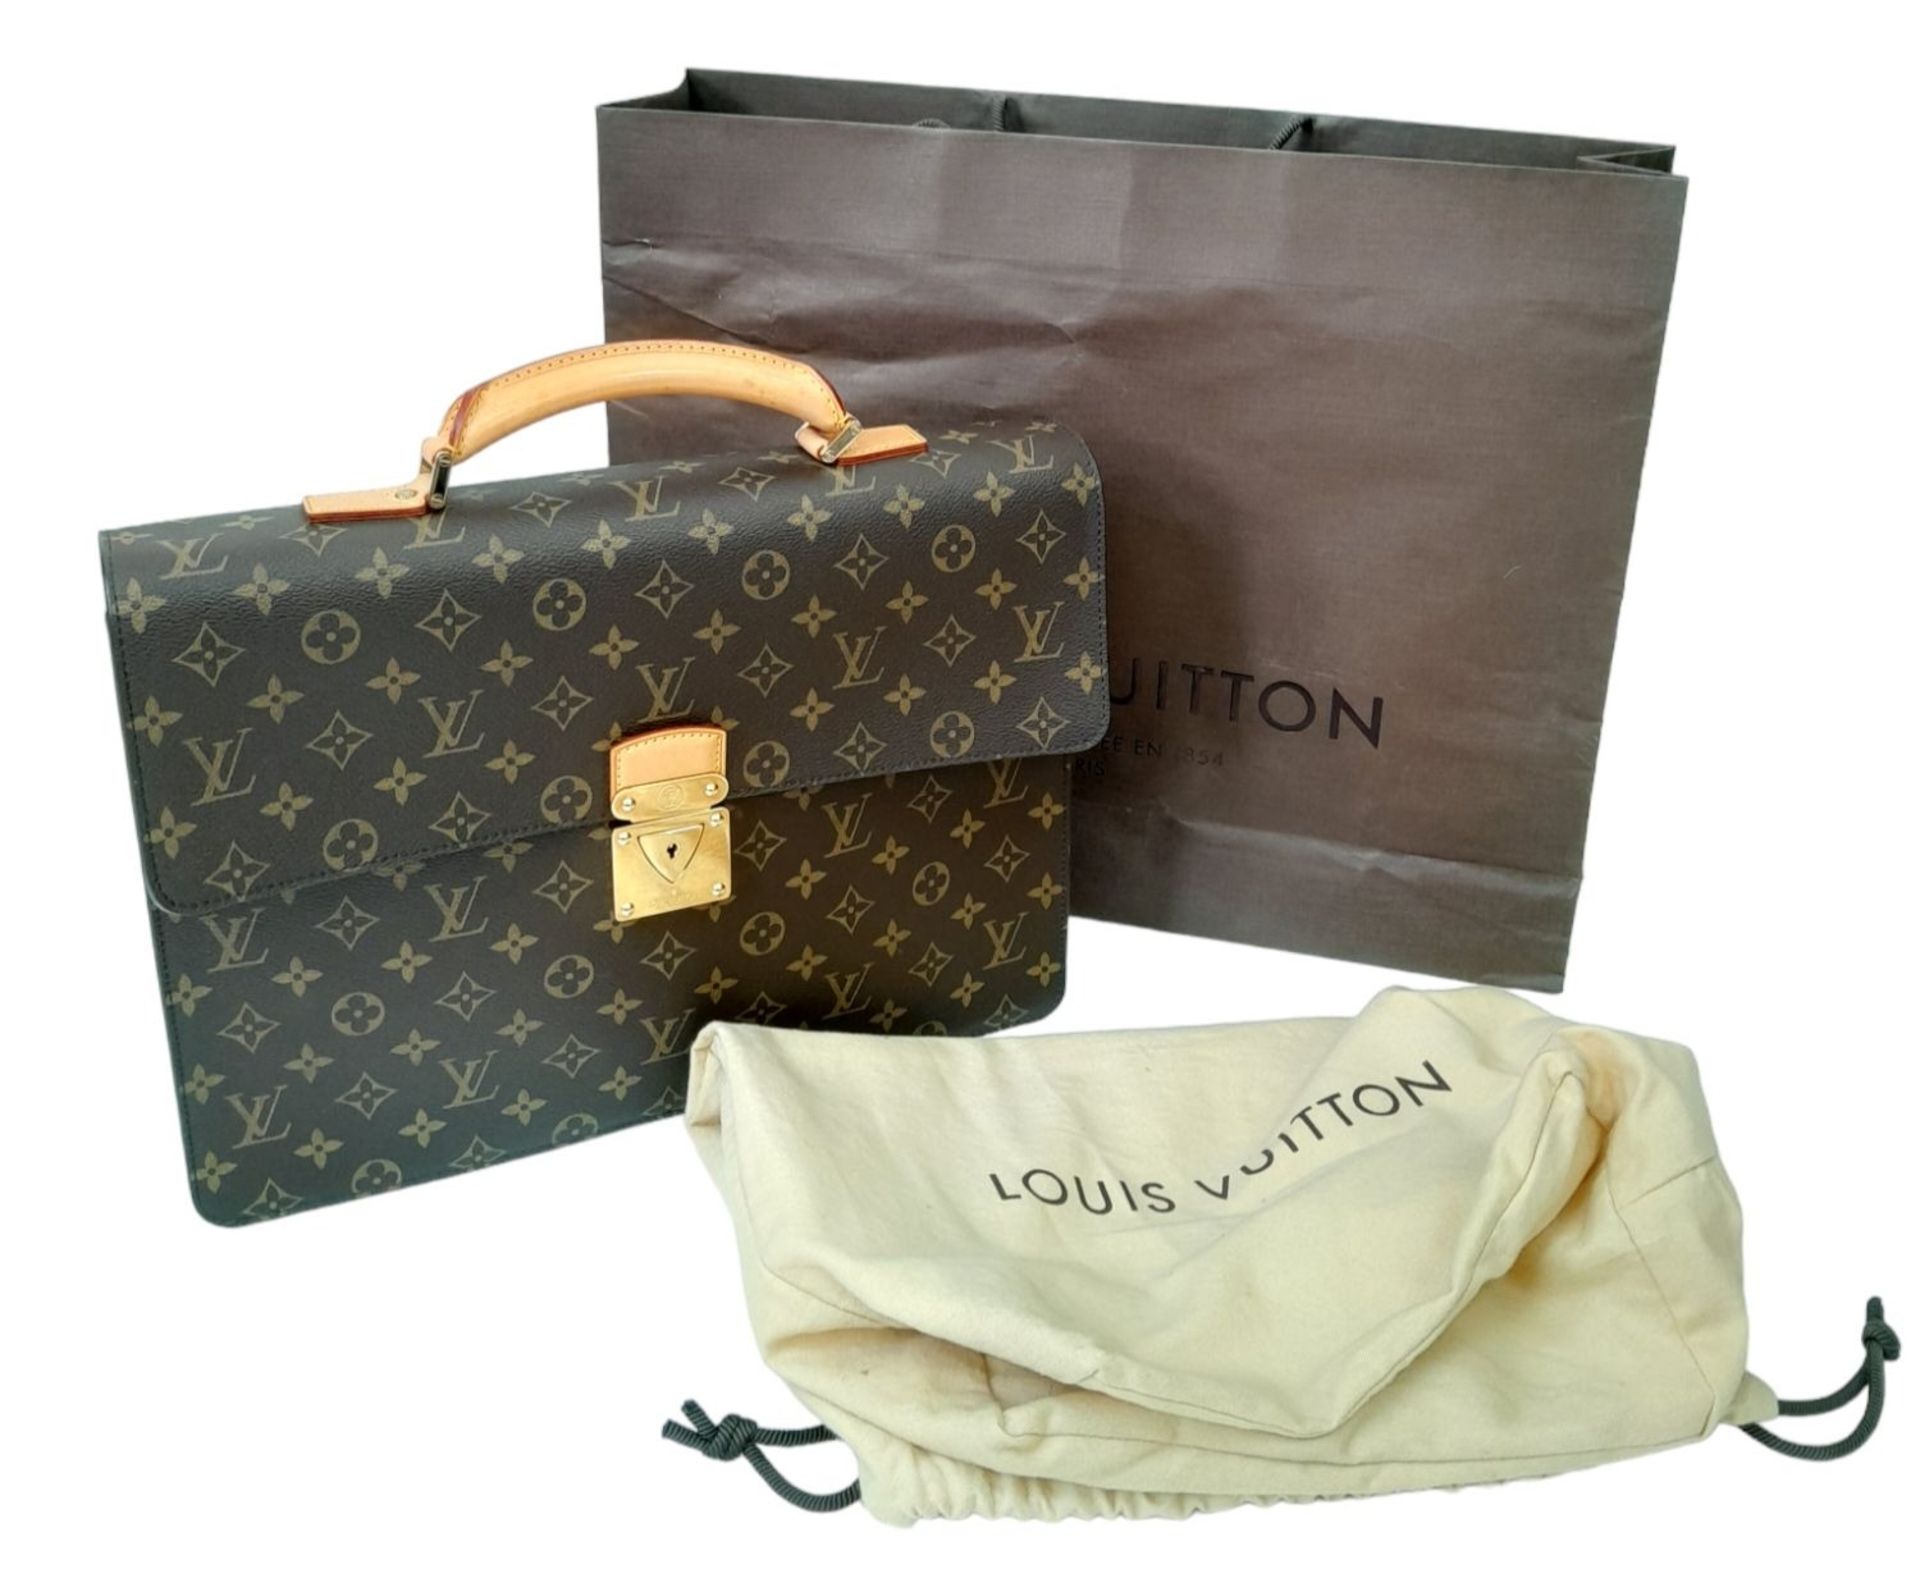 AN IMMACULATE LOUIS VUITTON CLASSIC BRIEF CASE IN UNUSED CONDITION WITH ORIGINAL DUST COVER . 38 X - Bild 6 aus 10